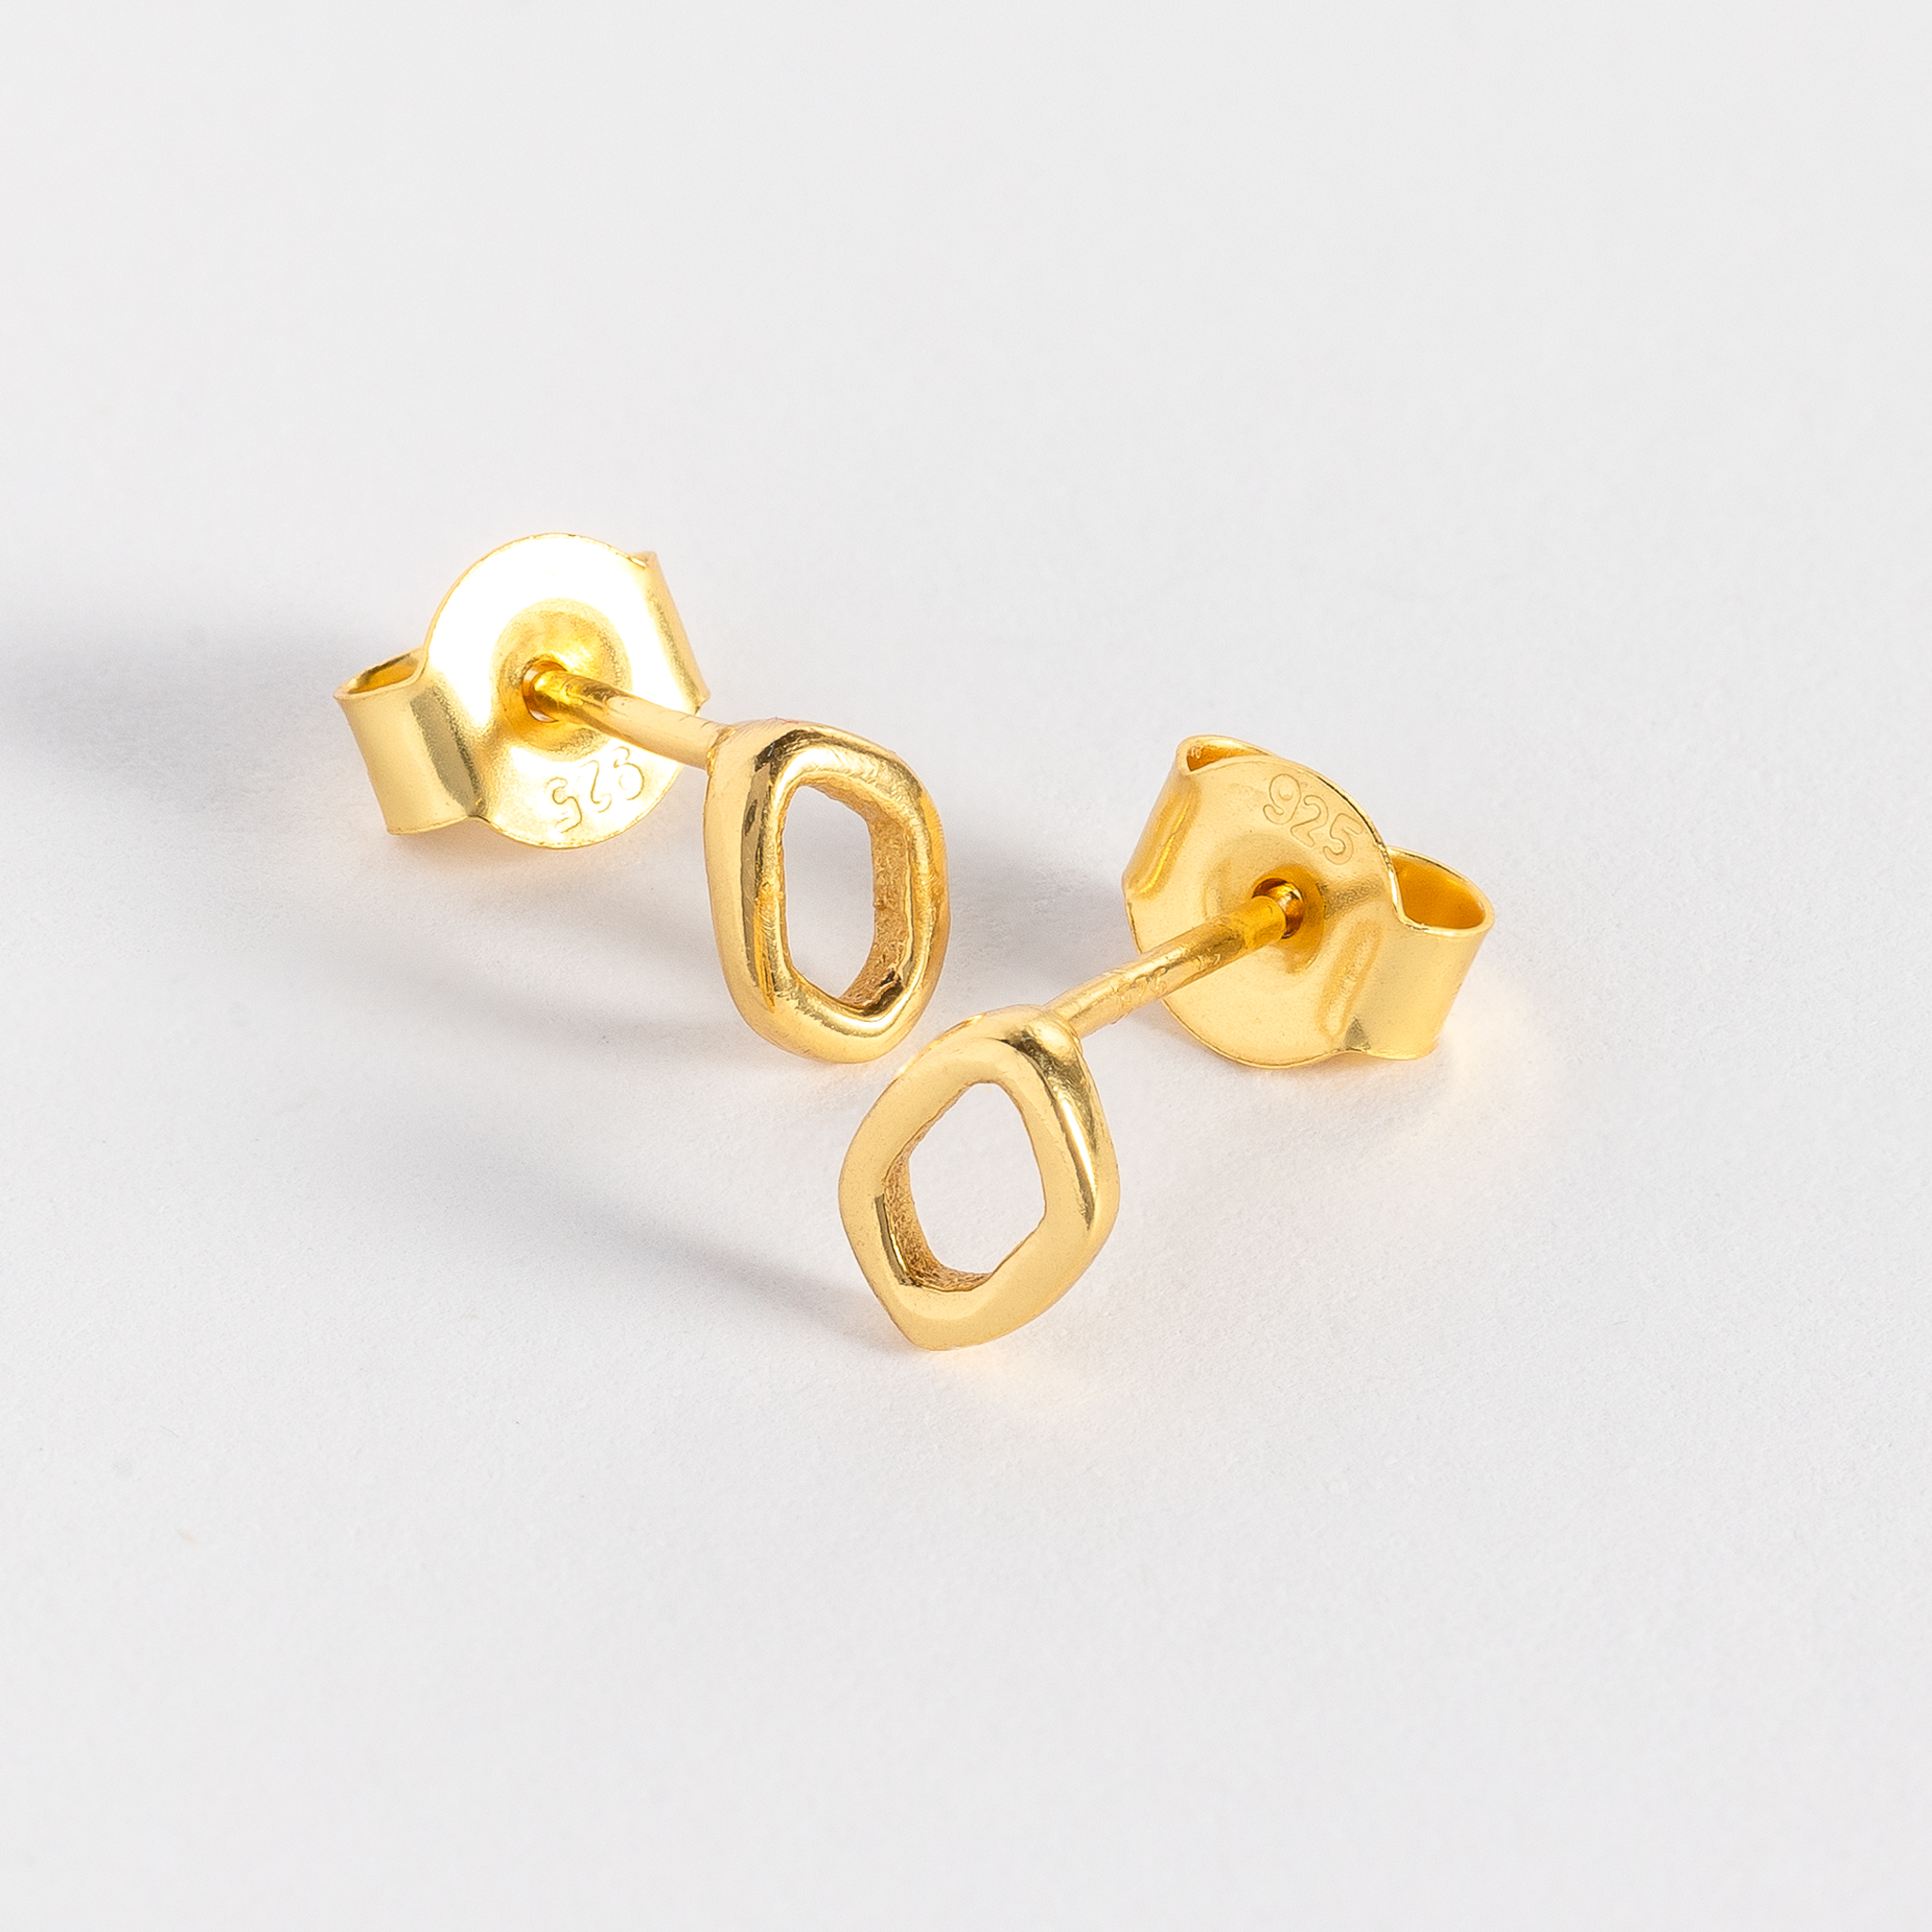 Dapple studs are inspired by gentle evening sunlight filtering through the trees and are crafted in sterling silver and 18ct gold vermeil